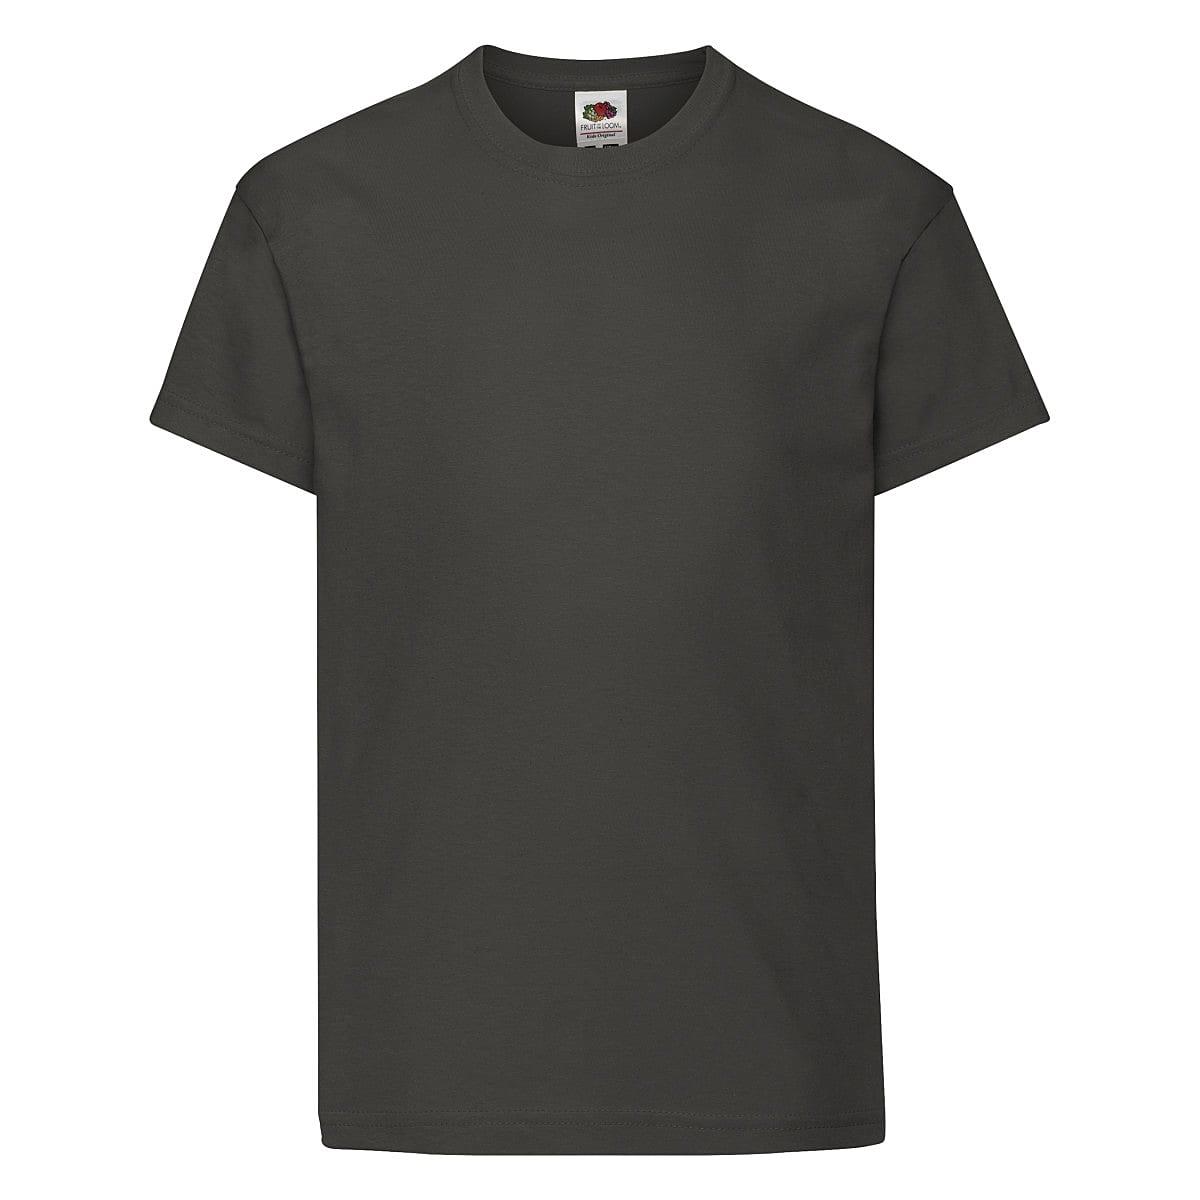 Fruit Of The Loom Kids Original T-Shirt in Light Graphite (Product Code: 61019)